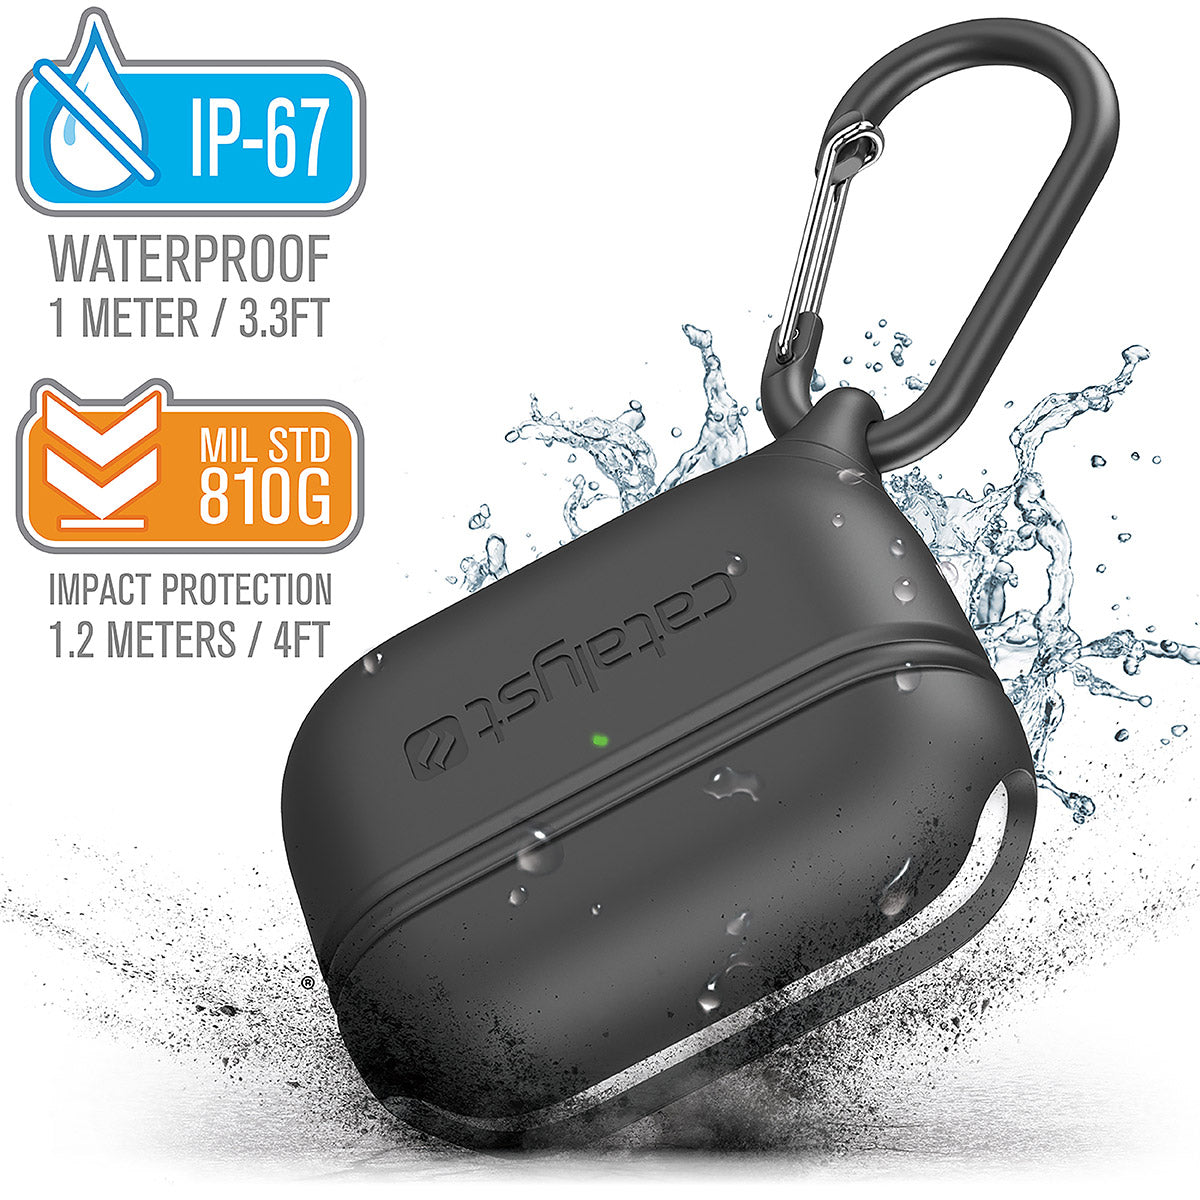 CATAPLAPDPROBLK | catalyst airpods pro gen 2 1 waterproof case carabiner special edition black with cracked floor and splashes of water text reads ip-67 waterproof 1 meter 3.3ft mil std 810g impact protection 1.2 meters 4ft